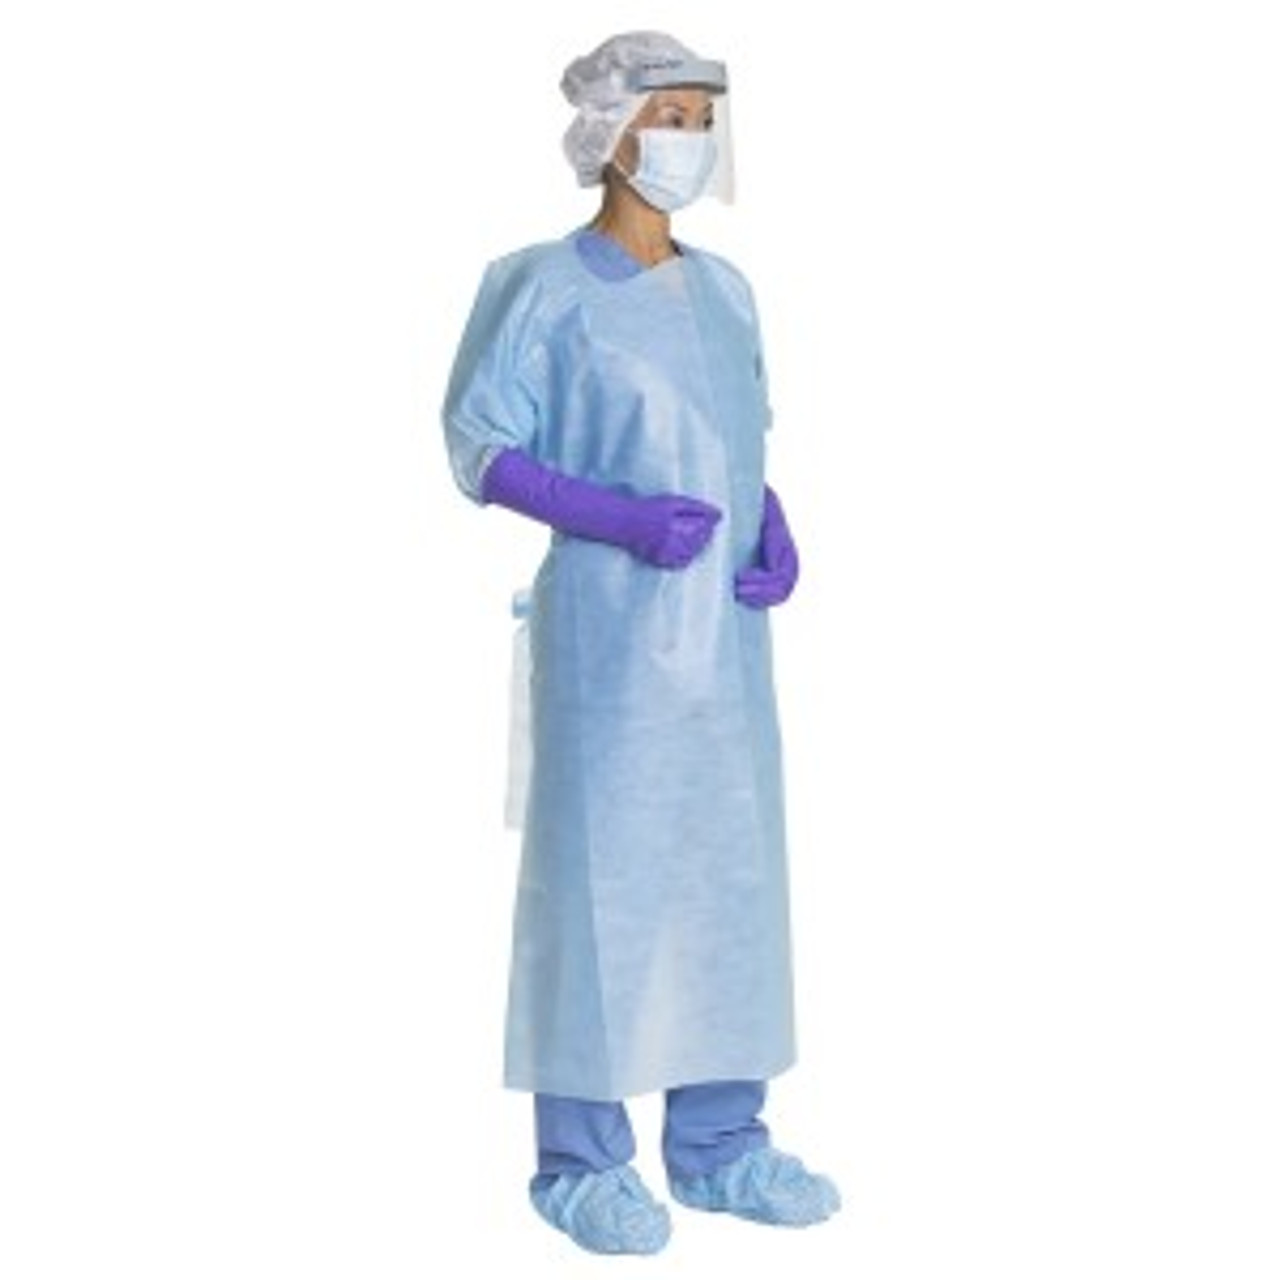 Halyard Laminated Comfort Gowns With Thumbhooks, Blue, Large, 100/cs